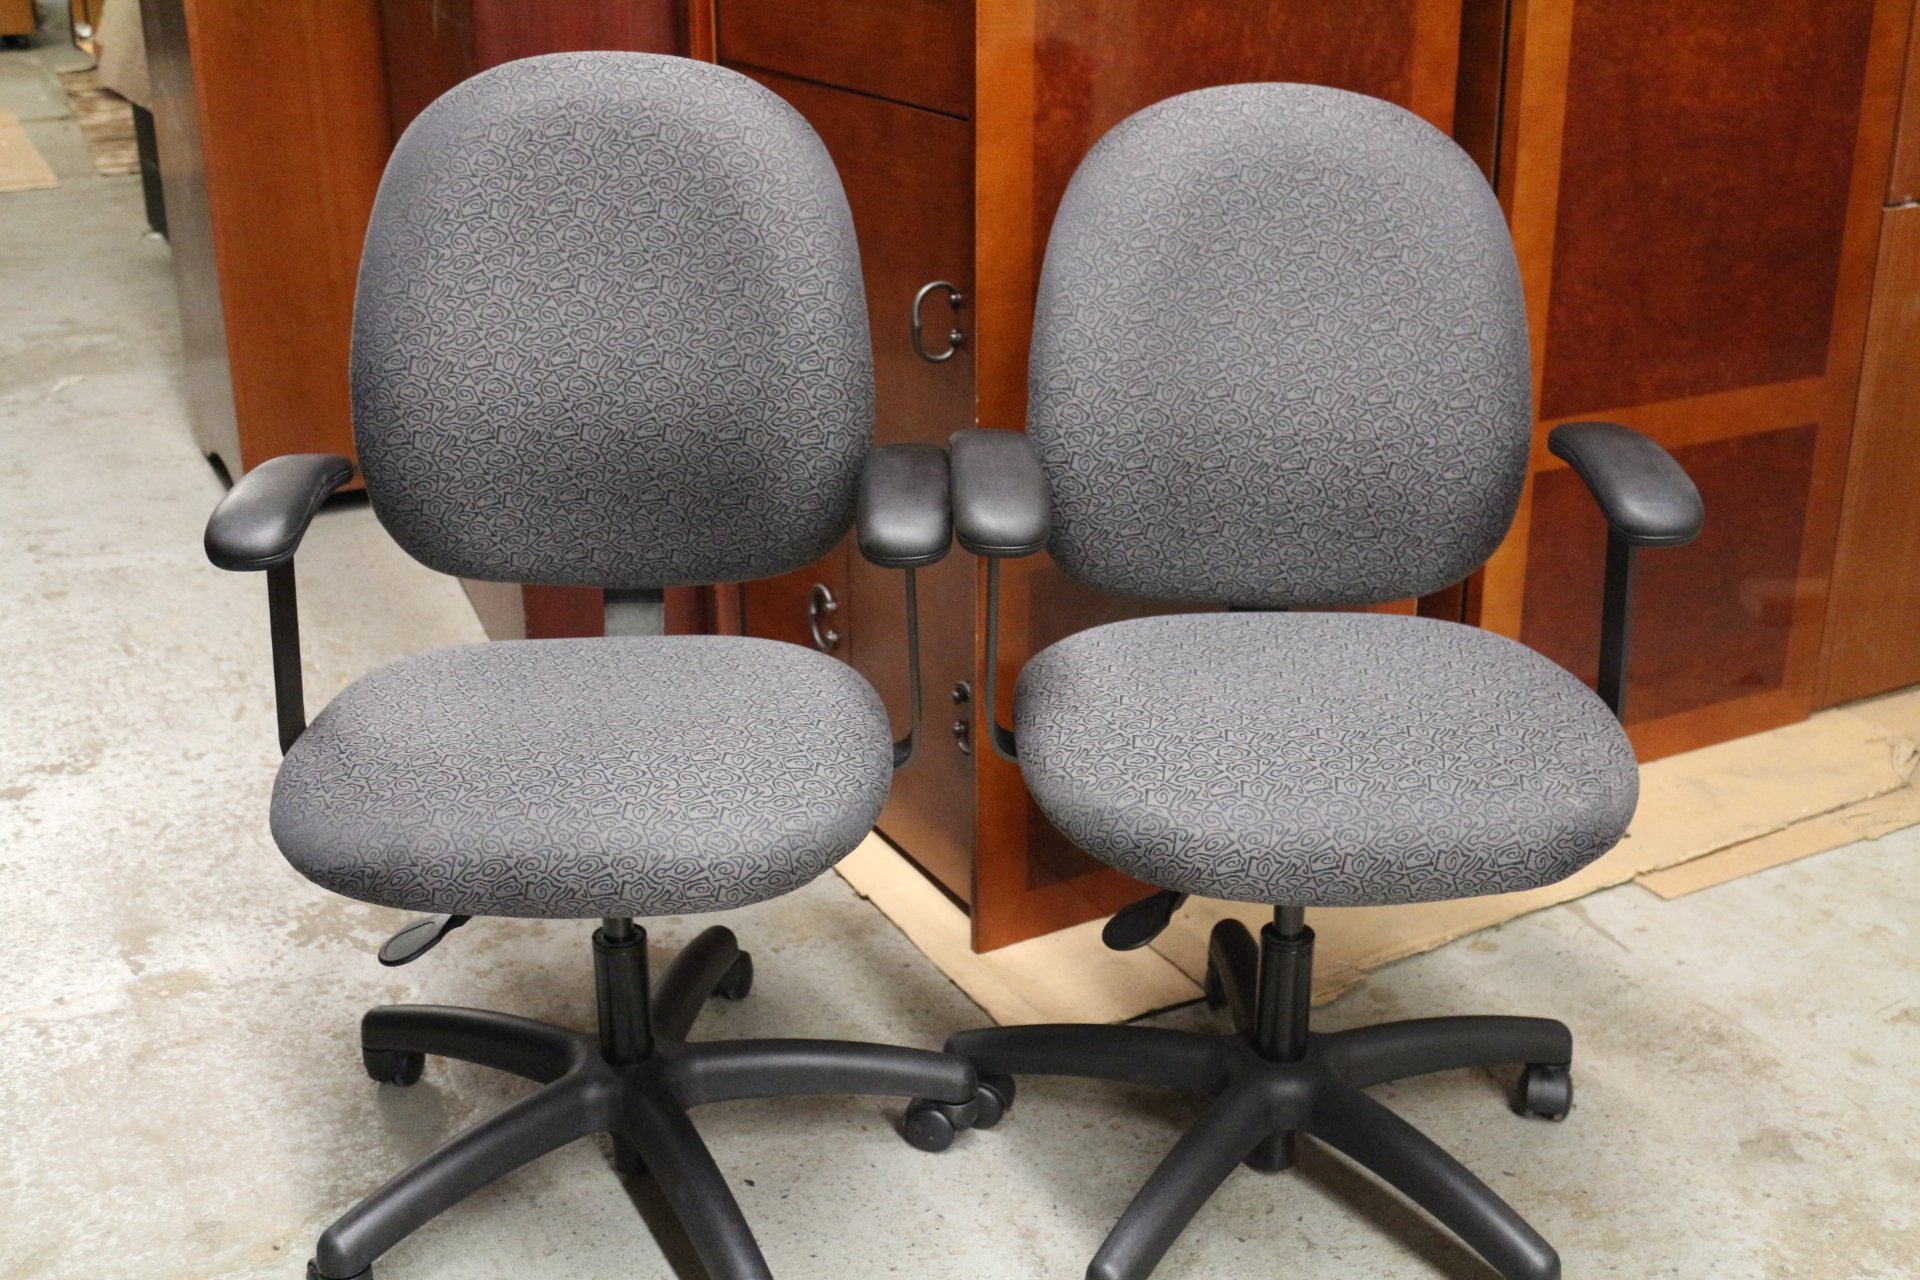 Stylex Black and Gray Task Chair